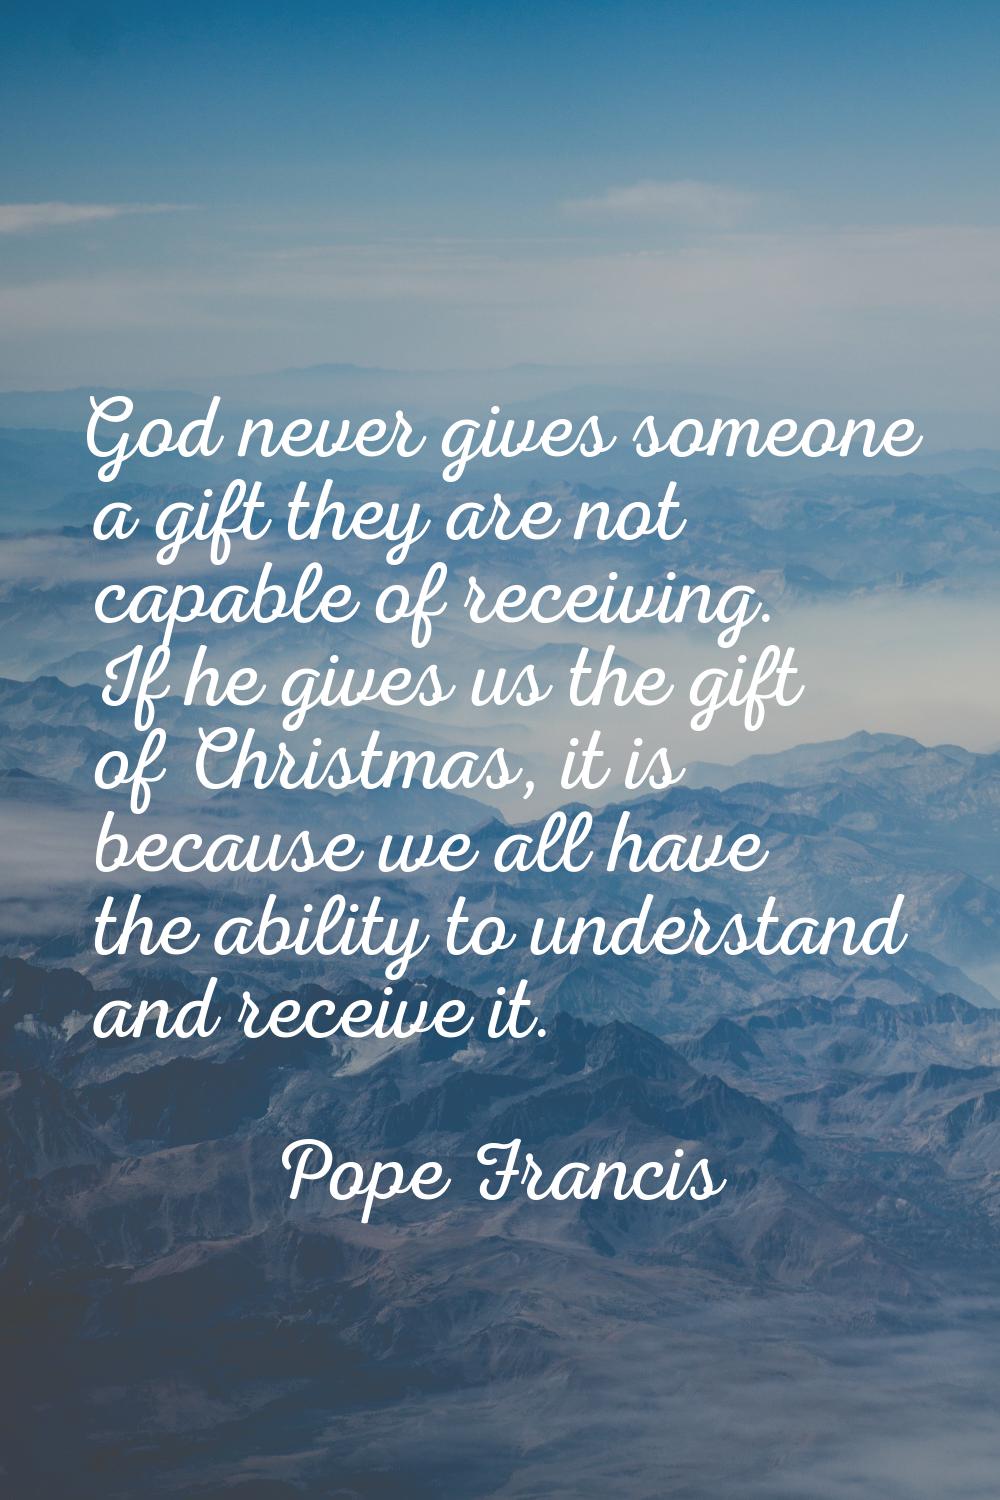 God never gives someone a gift they are not capable of receiving. If he gives us the gift of Christ